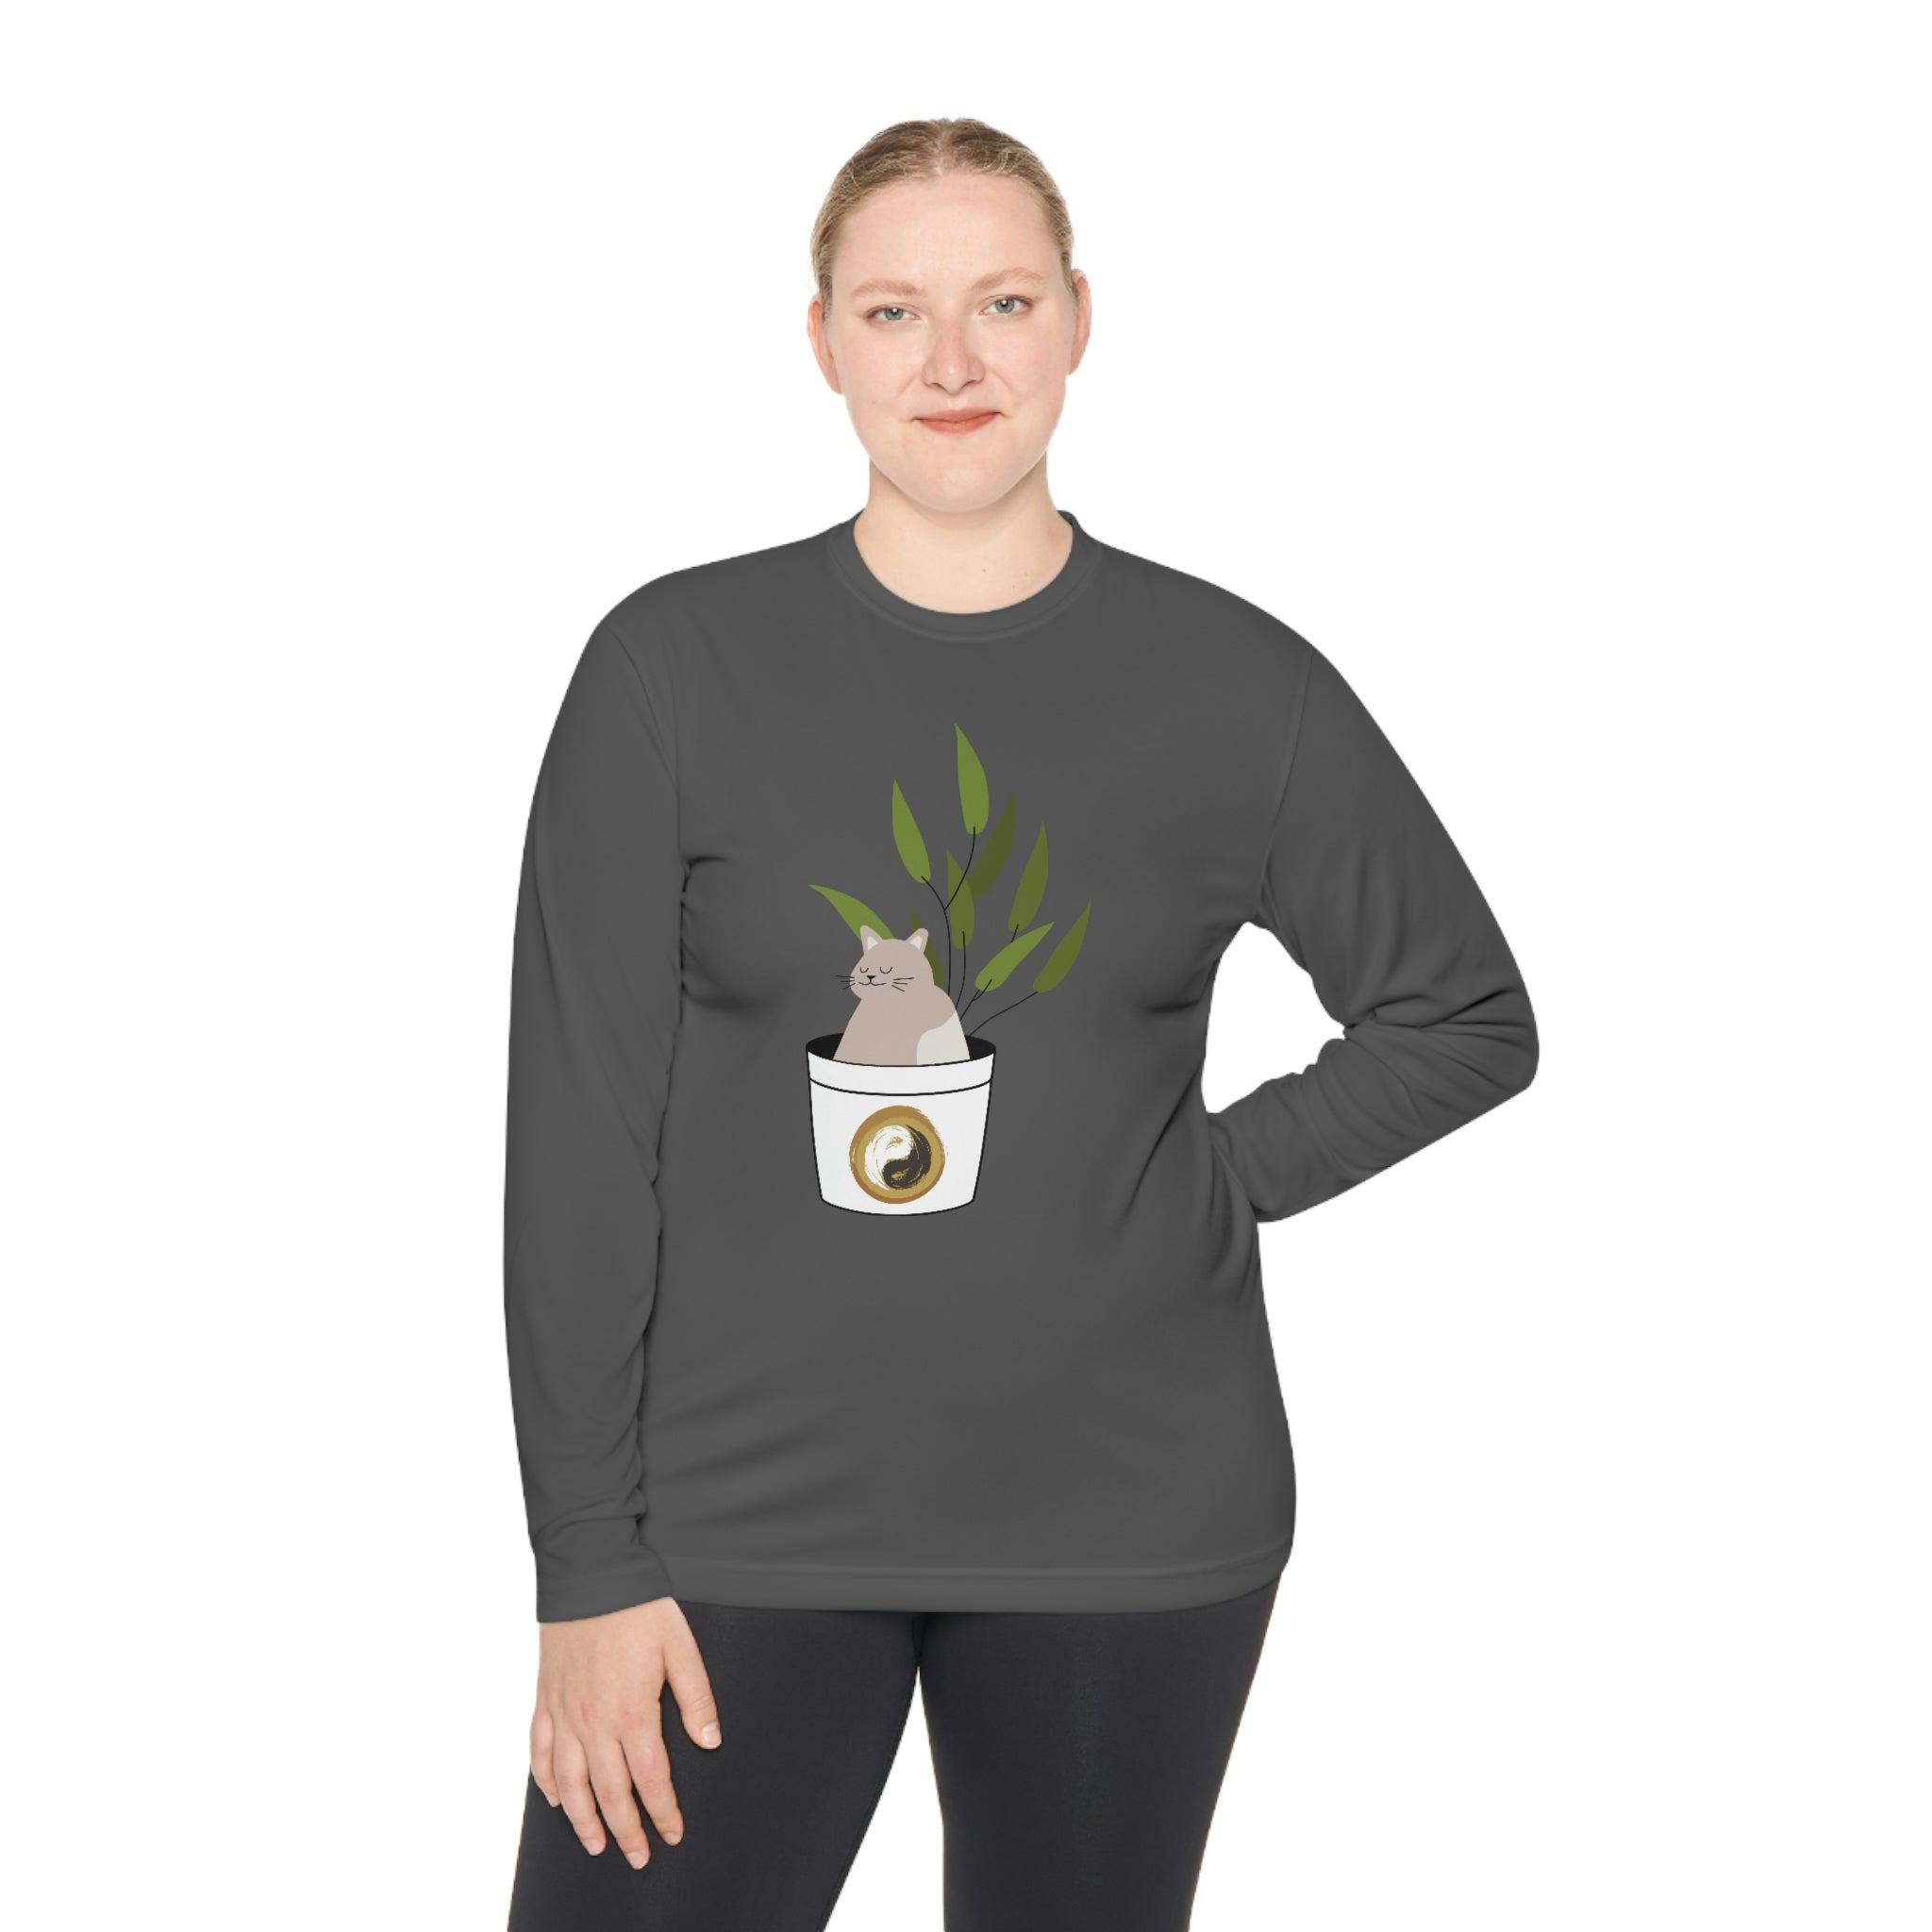 Unisex Lightweight Long Sleeve Yoga and Pilates Tee - Cute Cat - Personal Hour for Yoga and Meditations 